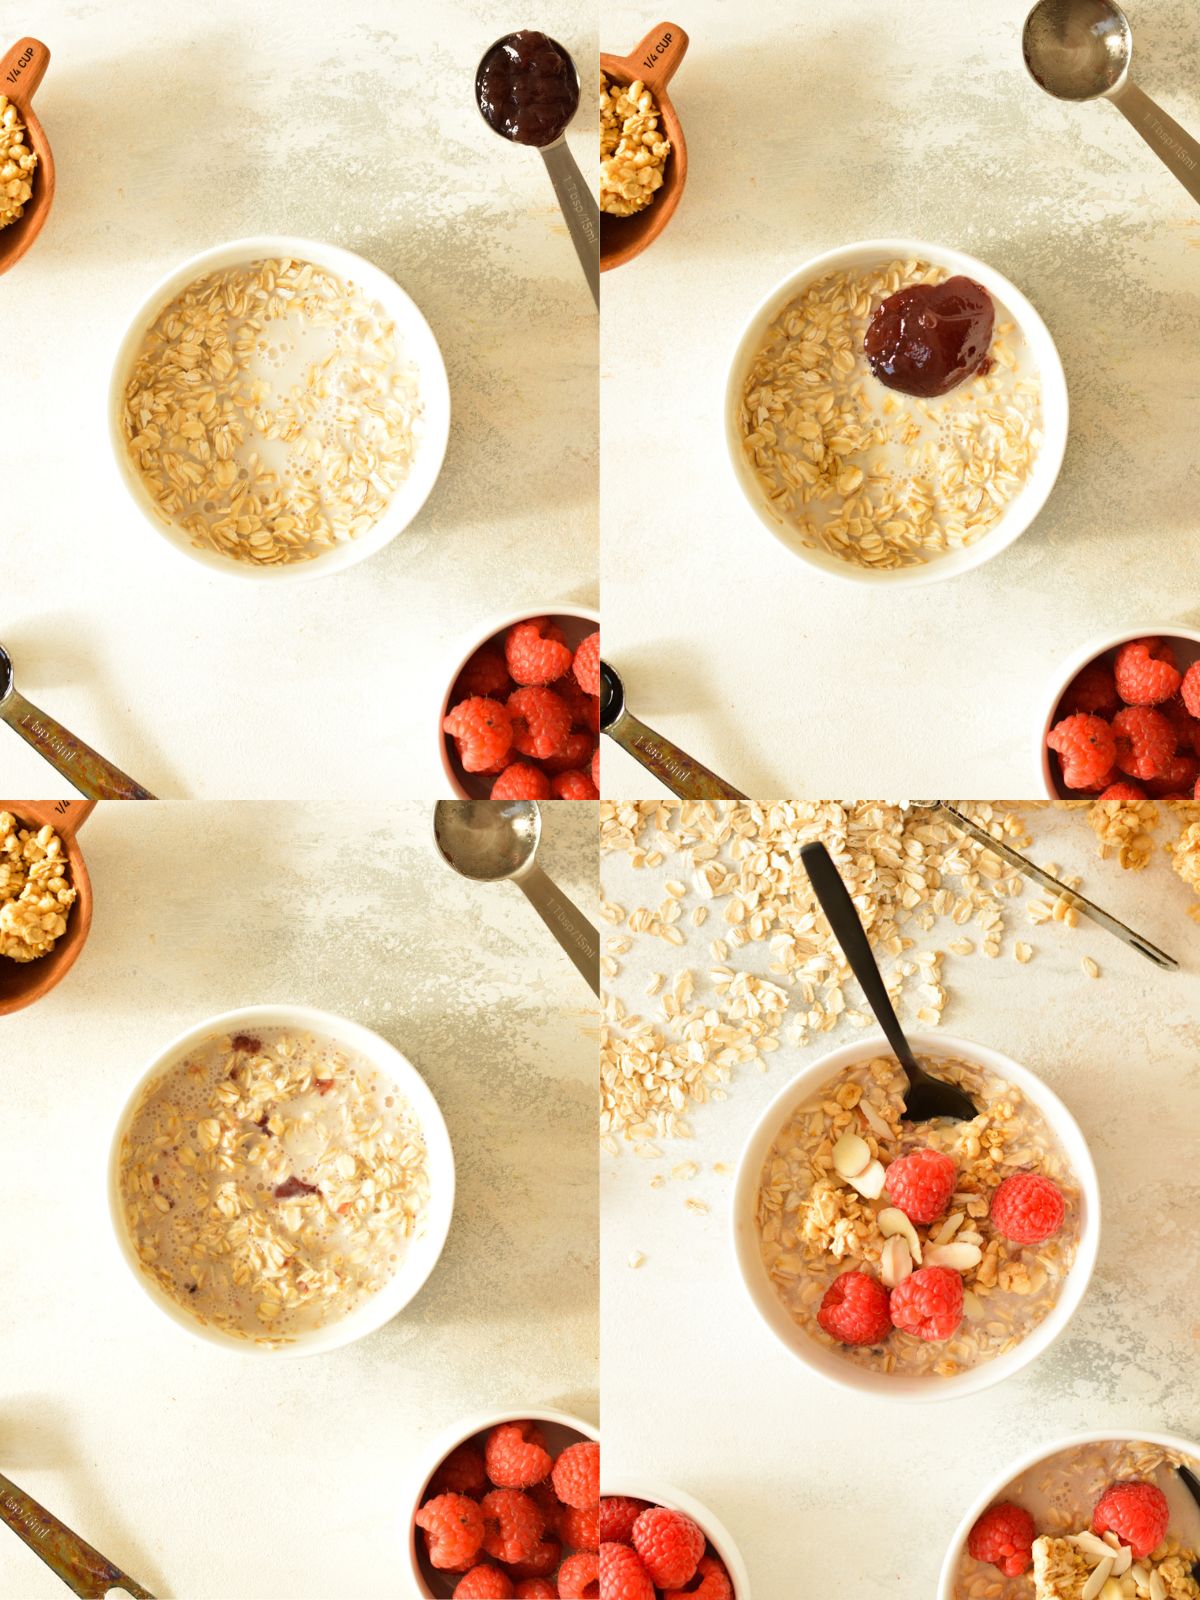 a bowl of oats with milk, jam, and raspberries